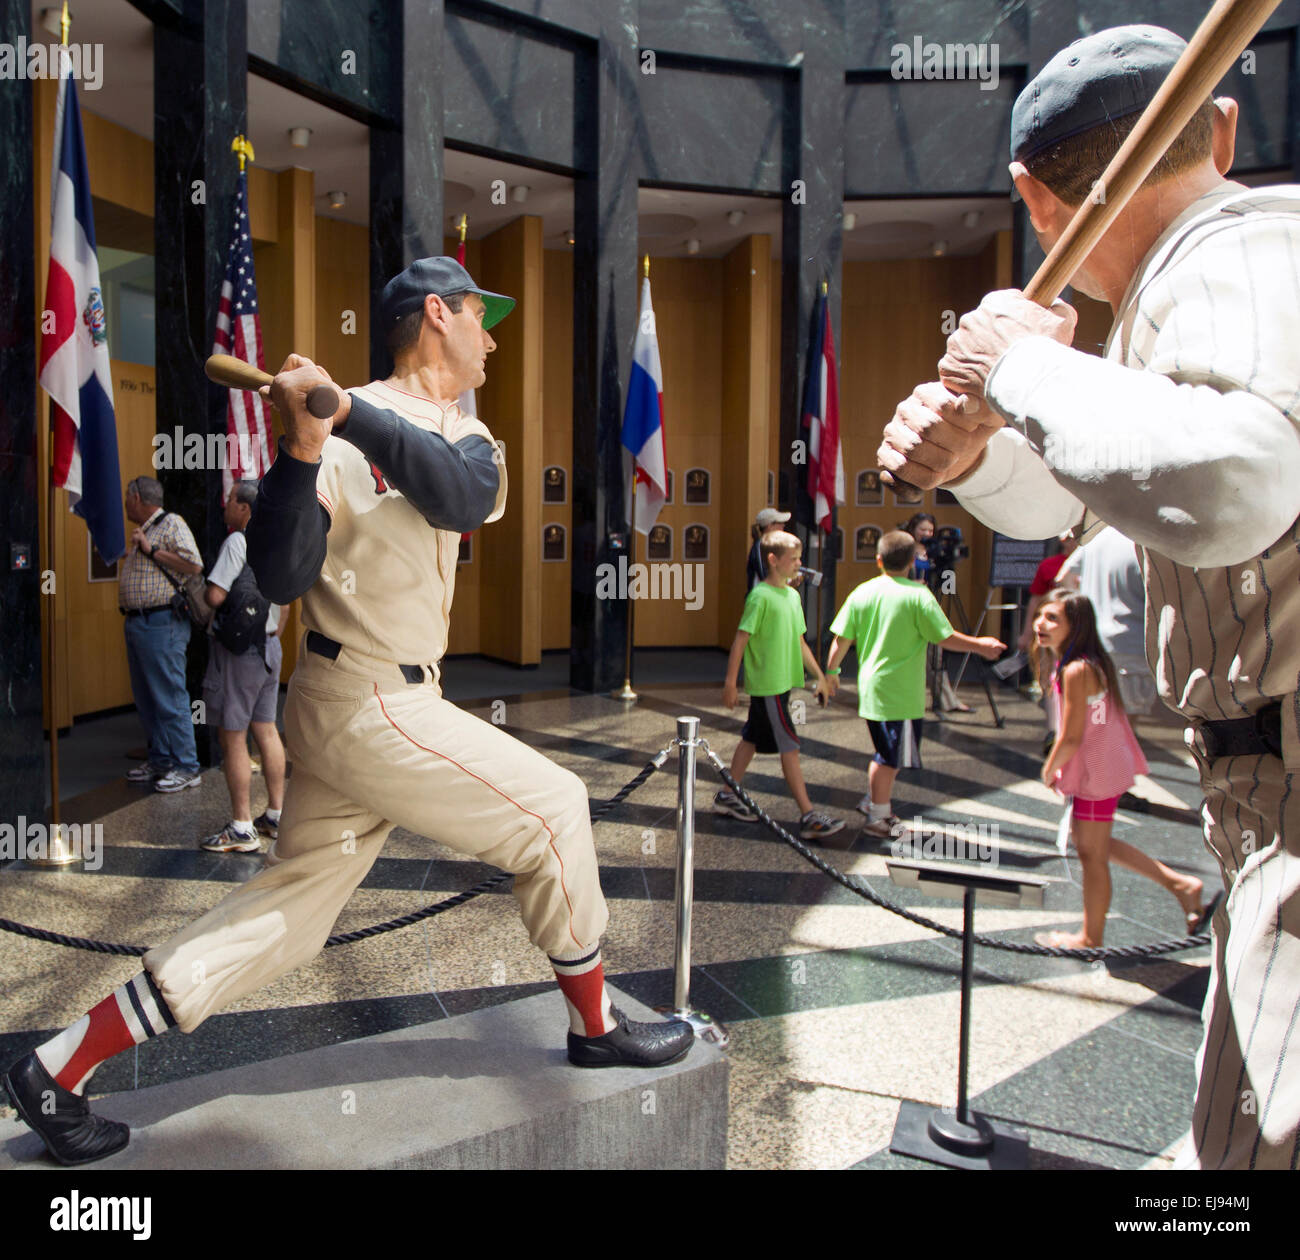 Baseball fans at the National Baseball Hall of Fame and Museum in Cooperstown, New York Stock Photo